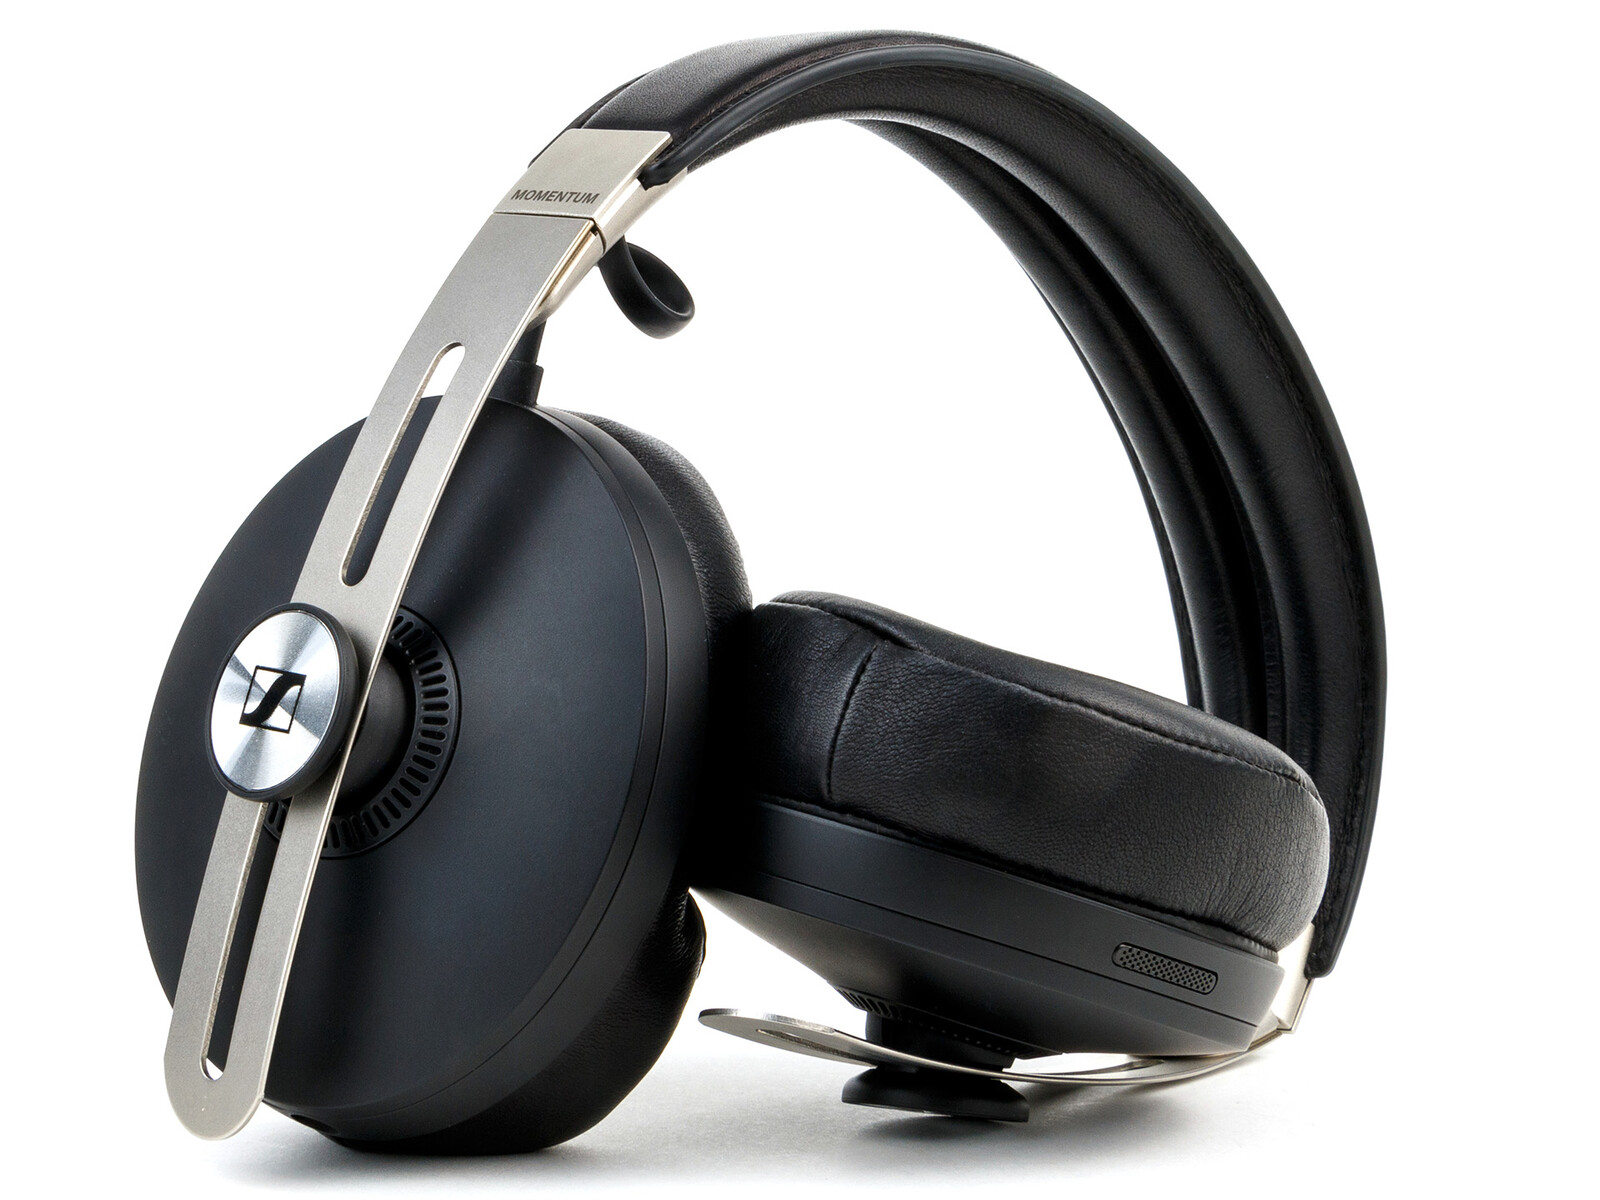 Sennheiser Momentum 3 Wireless Review - Strong ANC headphones with